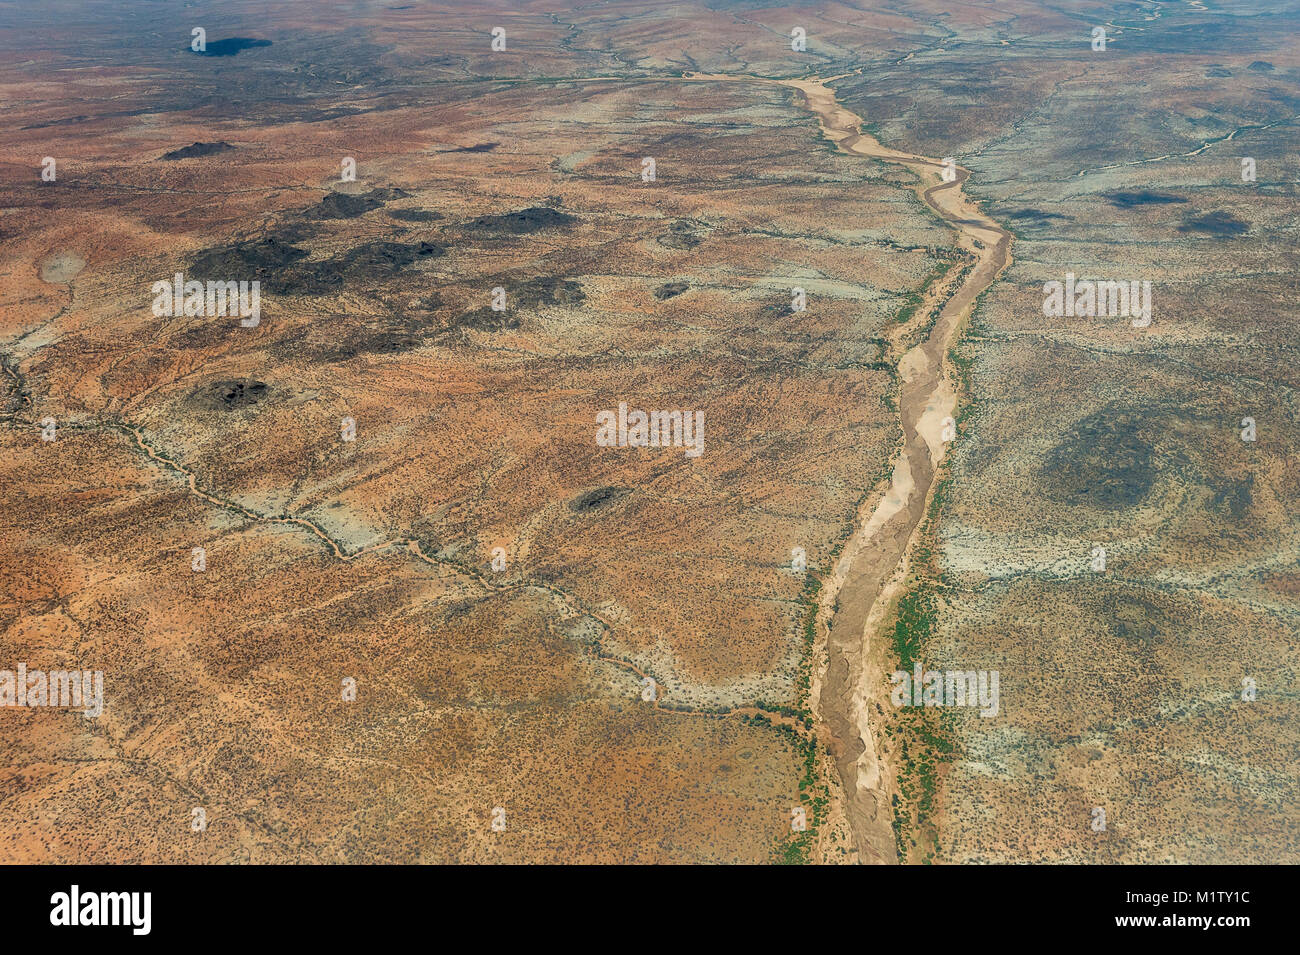 An aerial view of the almost dry Uaso Nyiro or Ewaso Ngiro River that flows through & divides the Buffalo Springs and Samburu National Reserves in nor Stock Photo